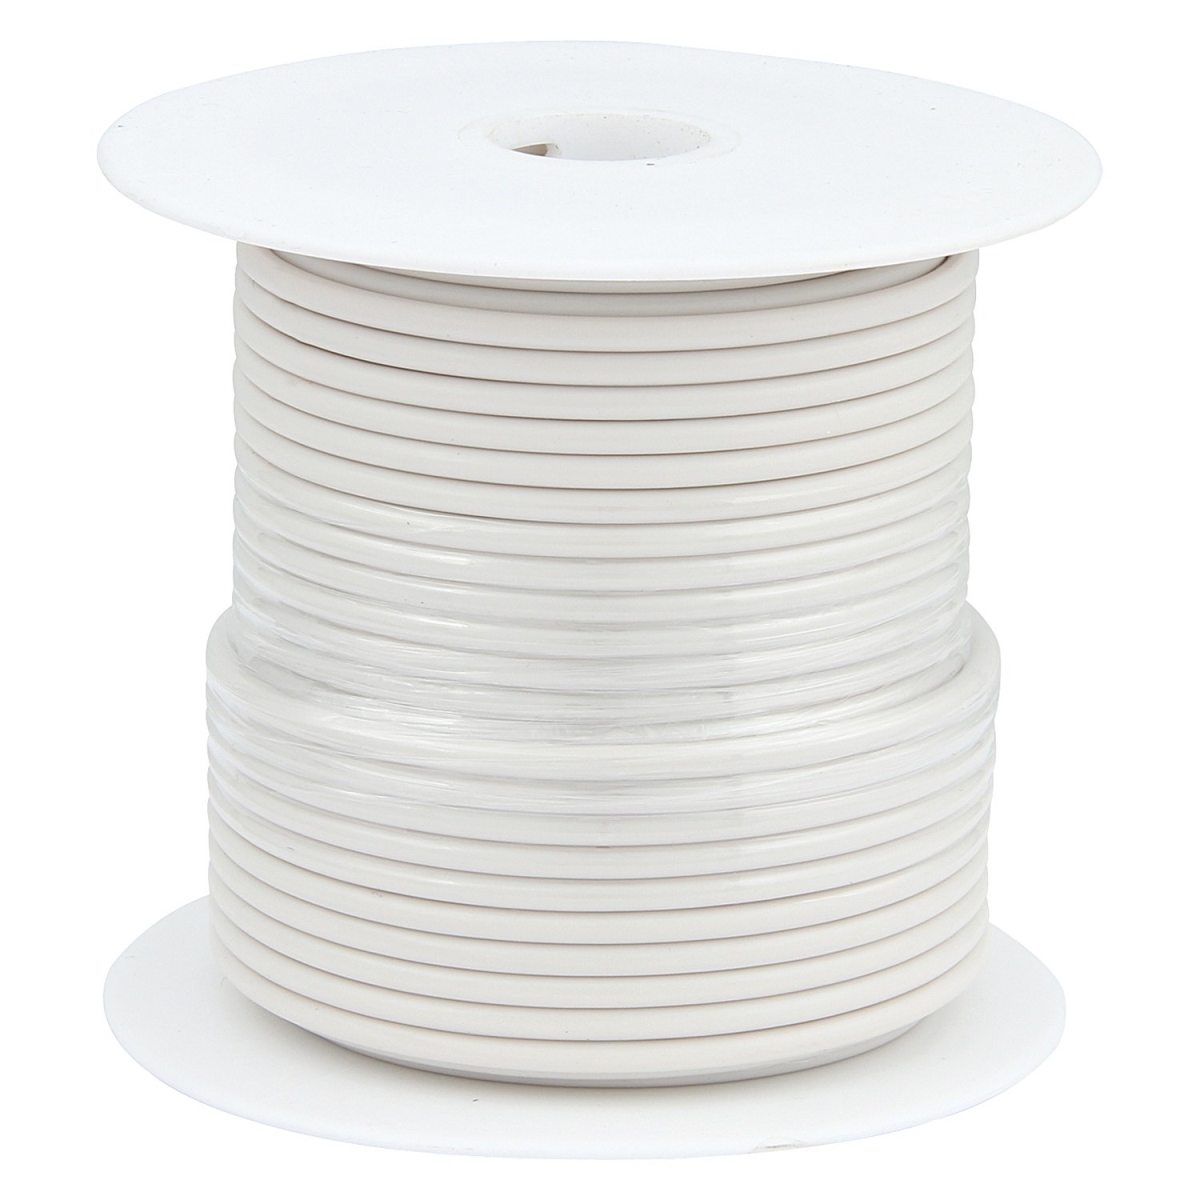 All76512 100 Ft. 20 Awg White Primary Wire